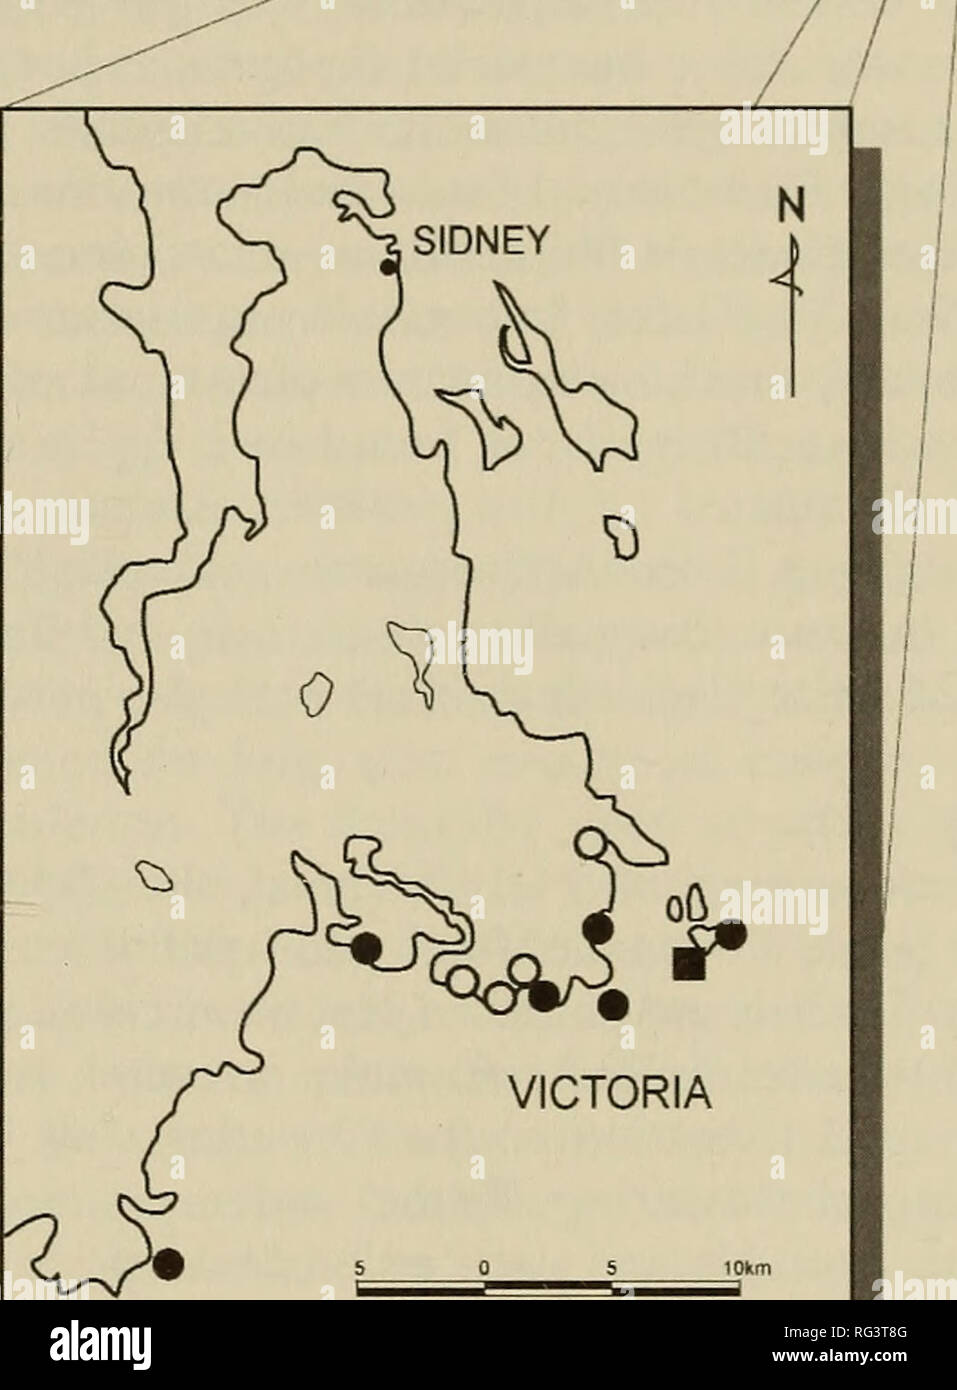 . The Canadian field-naturalist. Natural history. 50Â°N VANCOUVER ISLAND sr^N 49Â°N 128Â°W ^27Â°W-^^26Â°^N 125Â°W 124Â°W/ '123Â°W. Figure 2. Distribution of Sanicula arctopoides in British Columbia (o - extirpated sites, â¢ - recently con- firmed sites, â - present status unknown). Cat's-ear {Hypochaeris radicata). Although the overall site quality is fair to good, introduced species appeared to be more abundant here than at the Trial Islands Ecological Reserve. The population of S. arctopoides at Saxe Point Park is located on a gently sloping south facing grassy bluff in shallow soil over bed Stock Photo